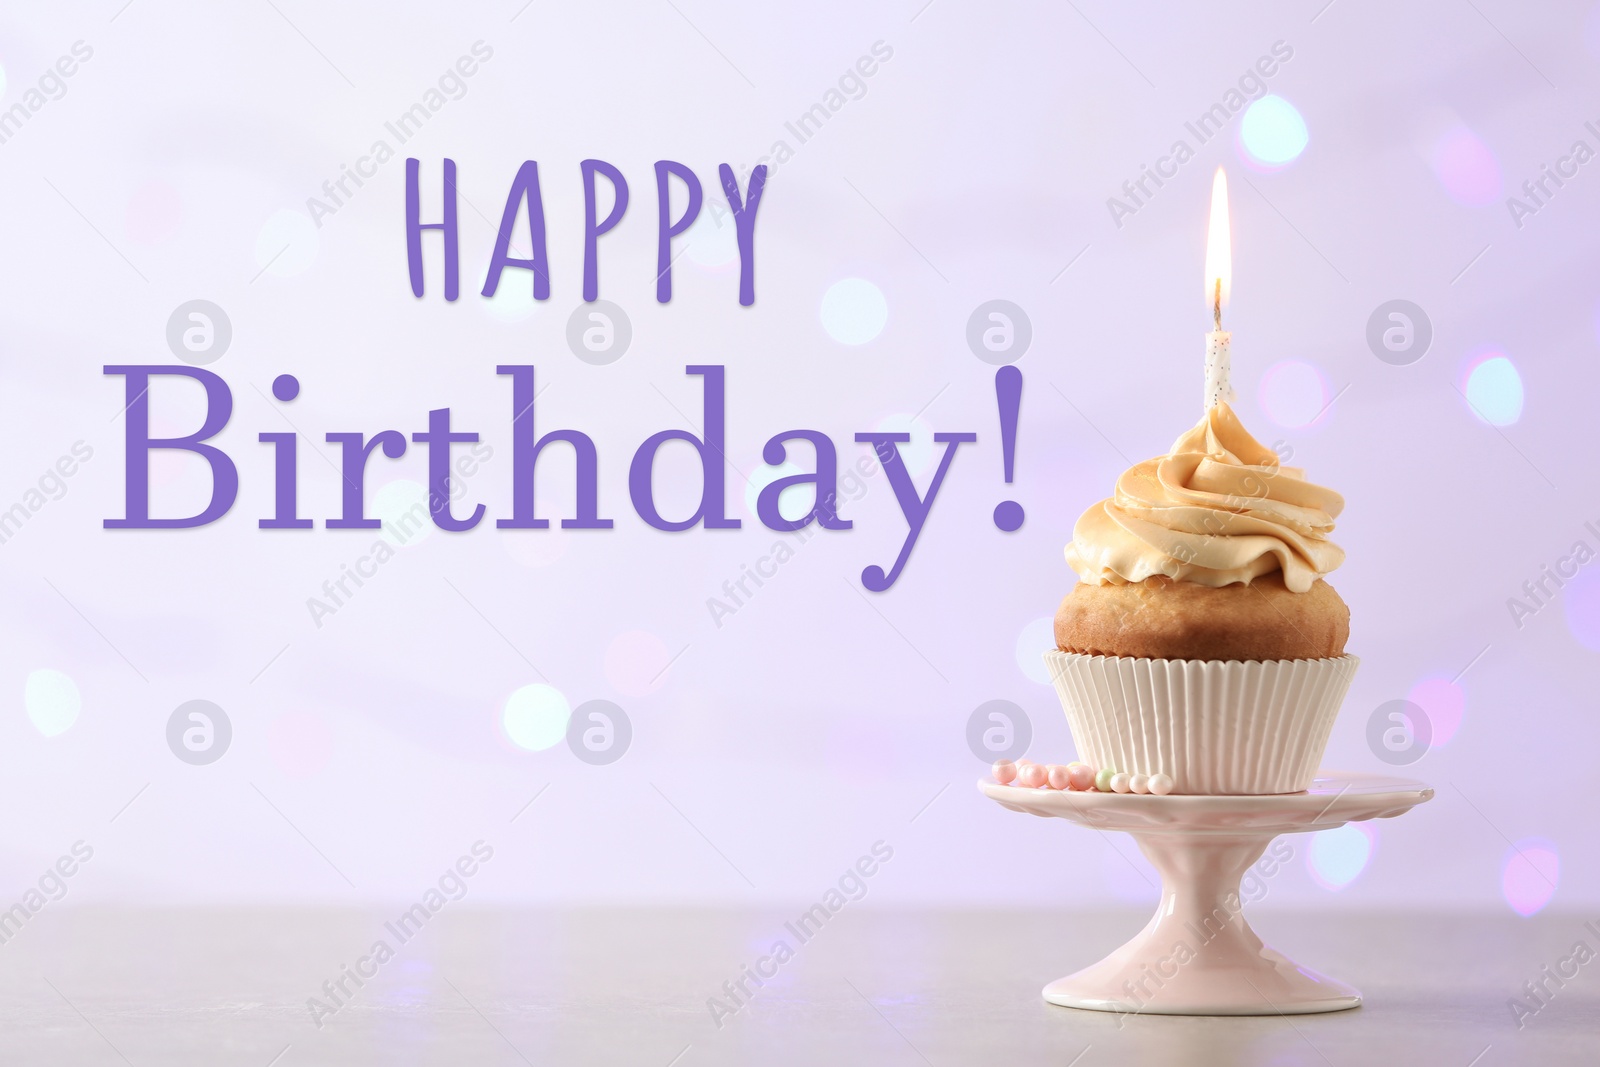 Image of Happy Birthday! Delicious cupcake with burning candle on table